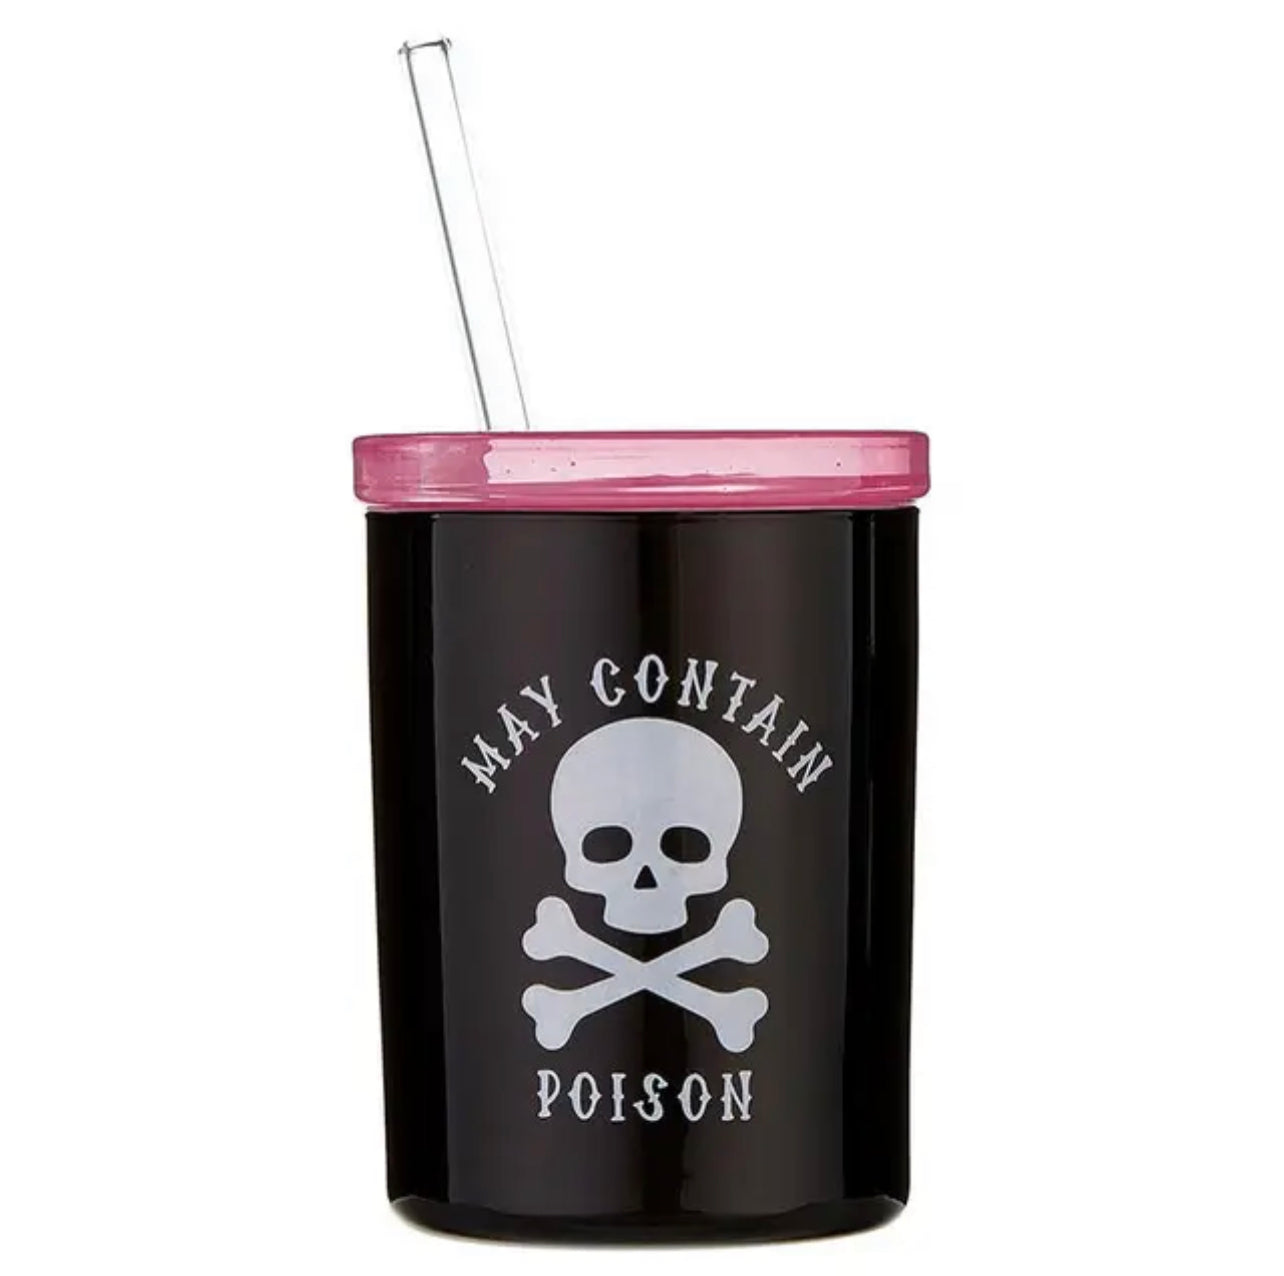 May Contain Poison, Glass Halloween DOF with lid